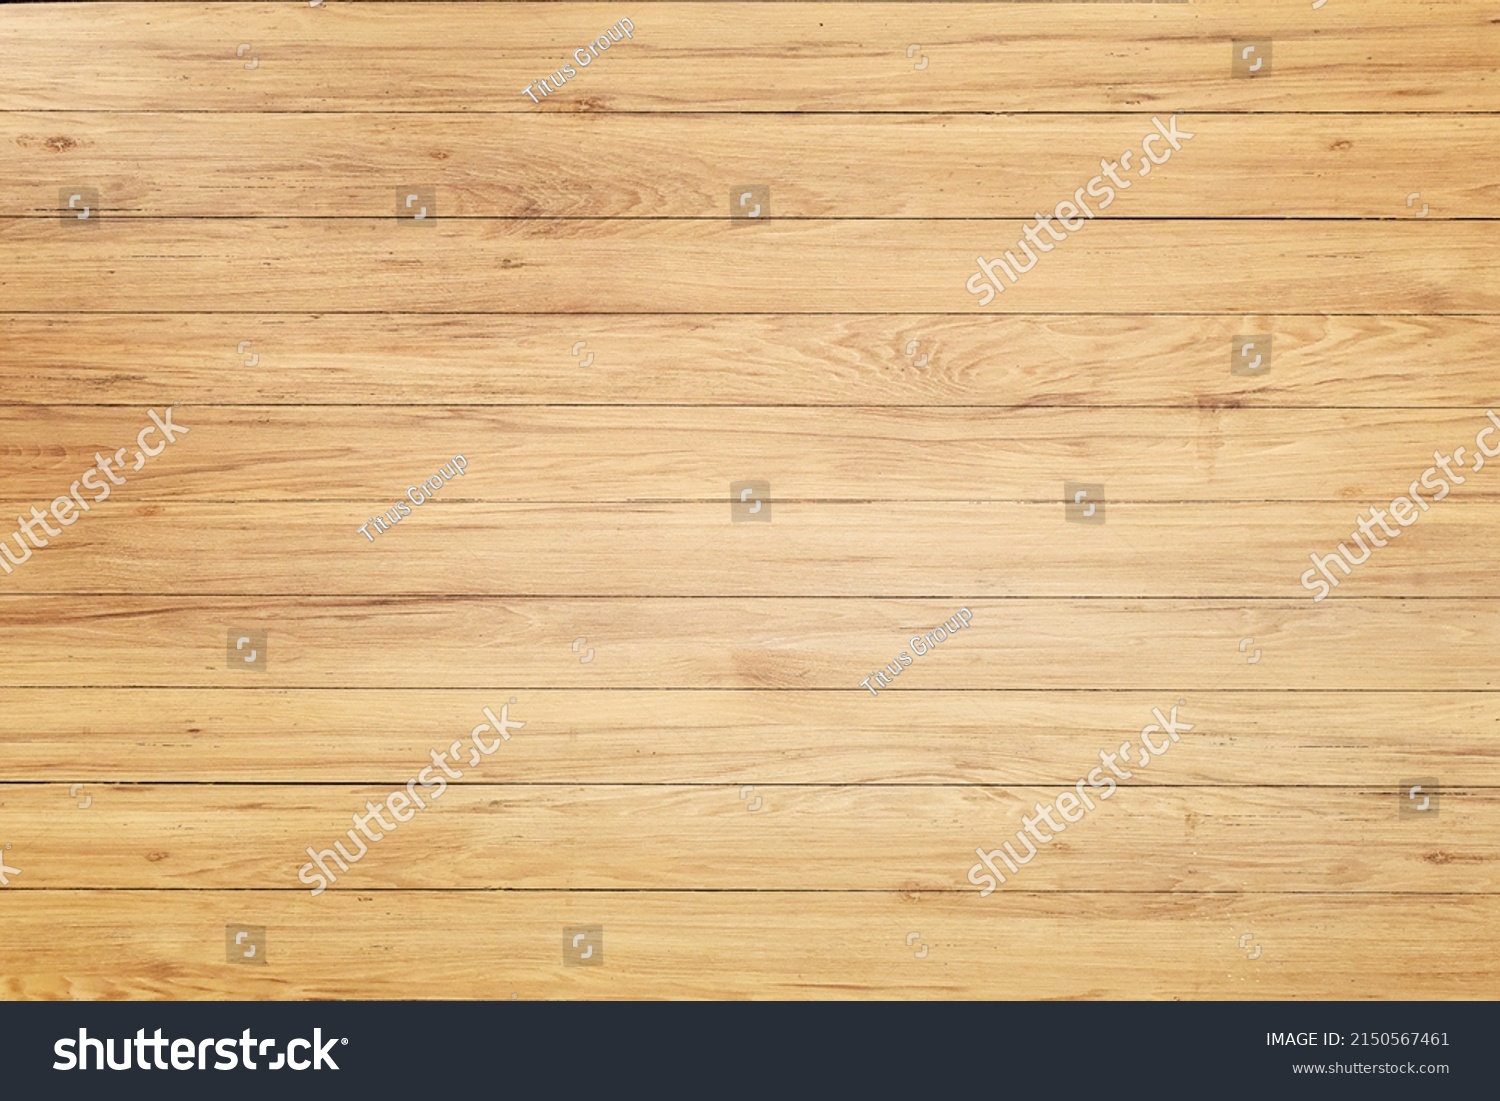 wood texture, abstract wooden background #2150567461